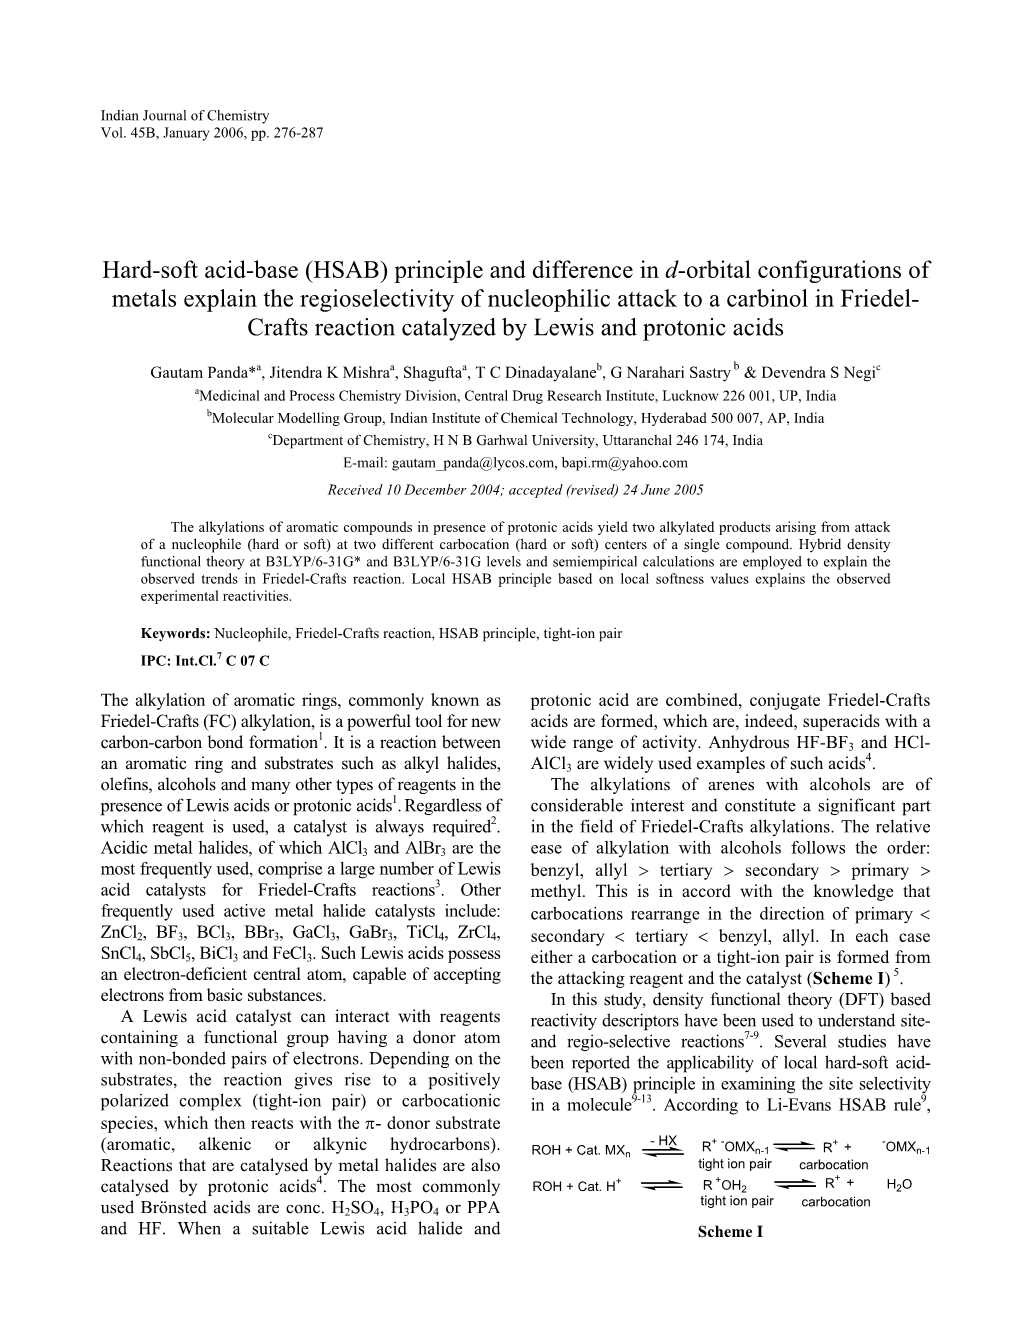 Hard-Soft Acid-Base (HSAB) Principle and Difference in D-Orbital